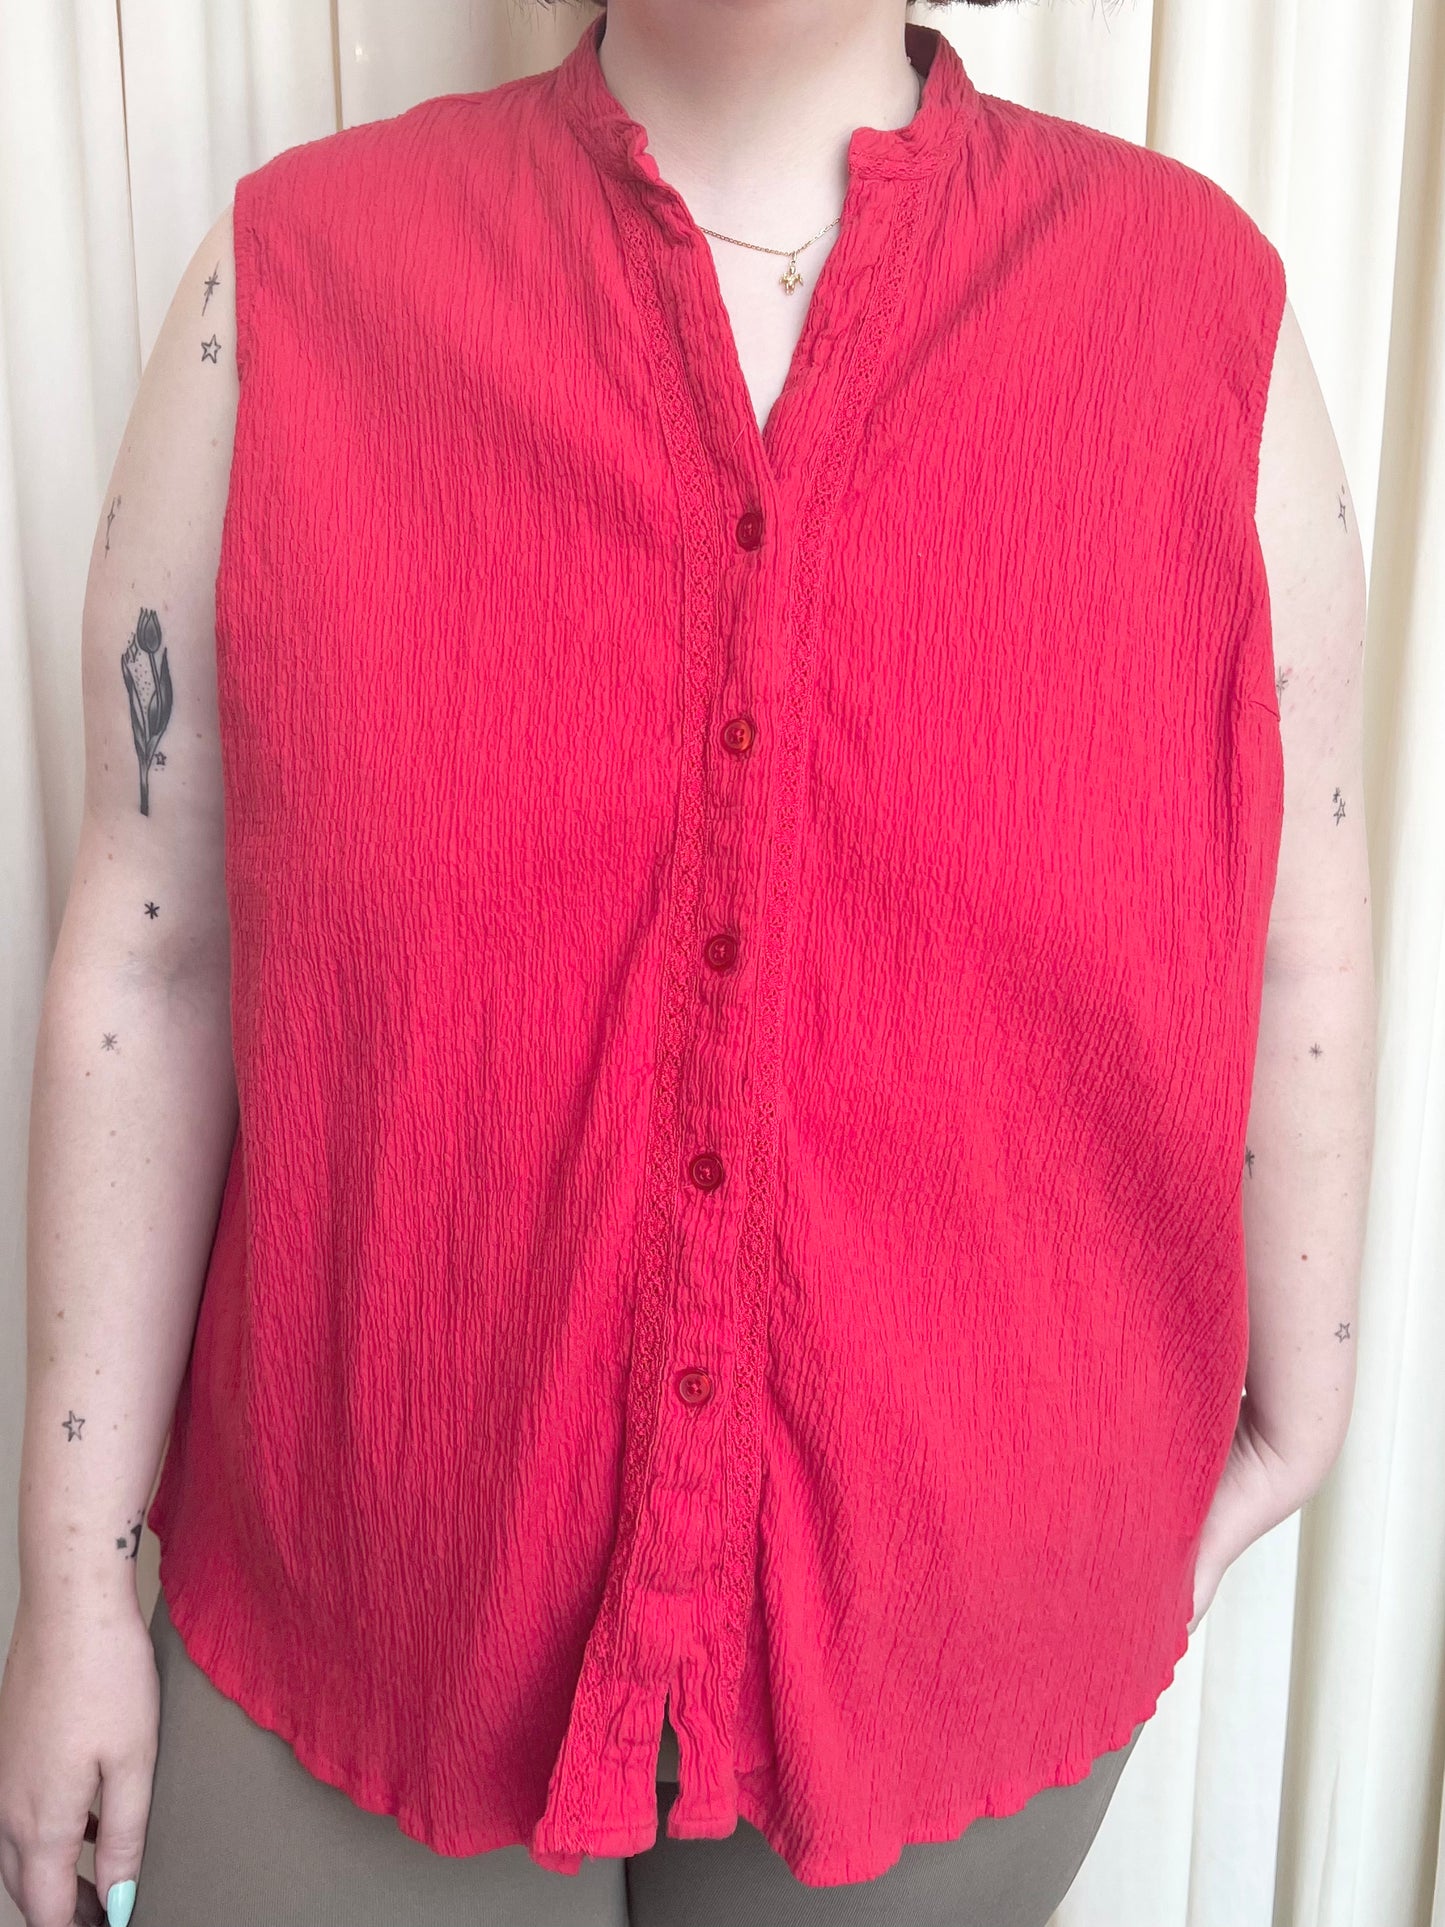 Vintage Red Textured Tank - 3X-Large